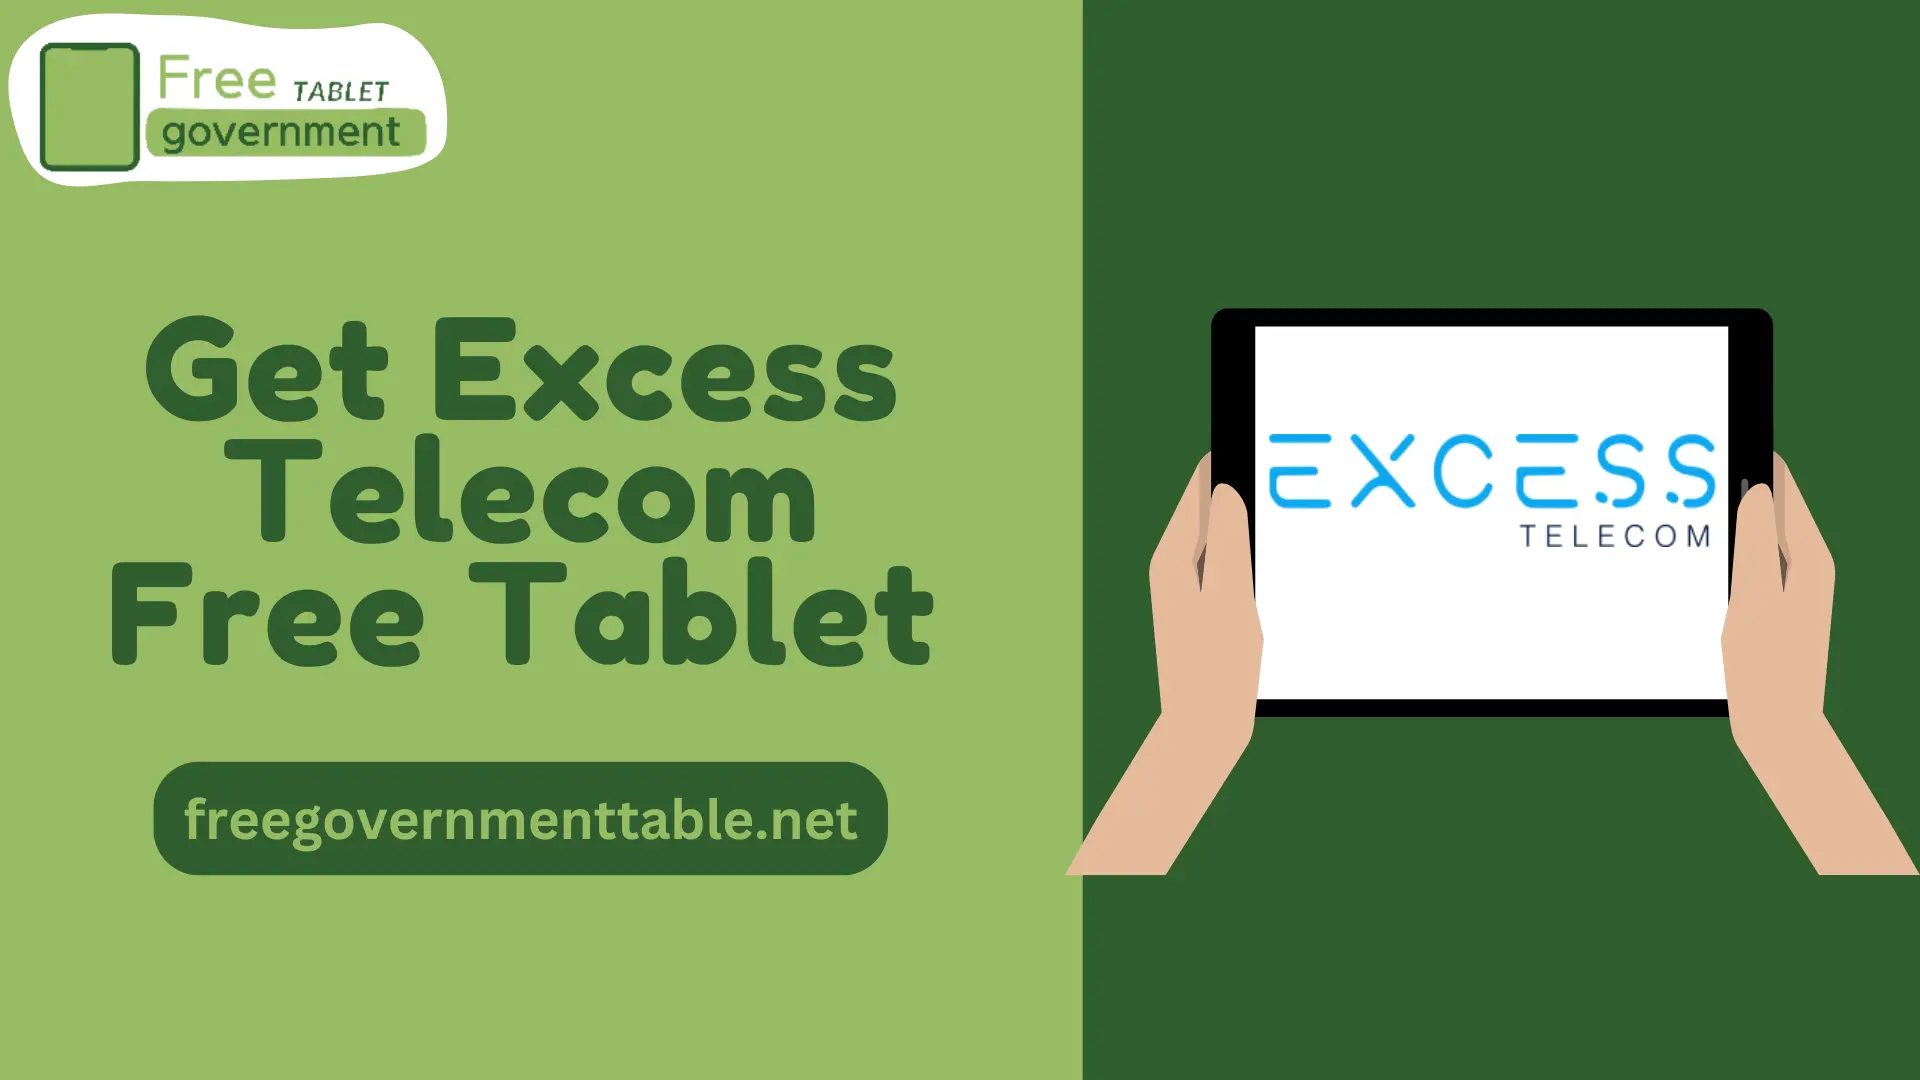 How to Get Excess Telecom Free Tablet